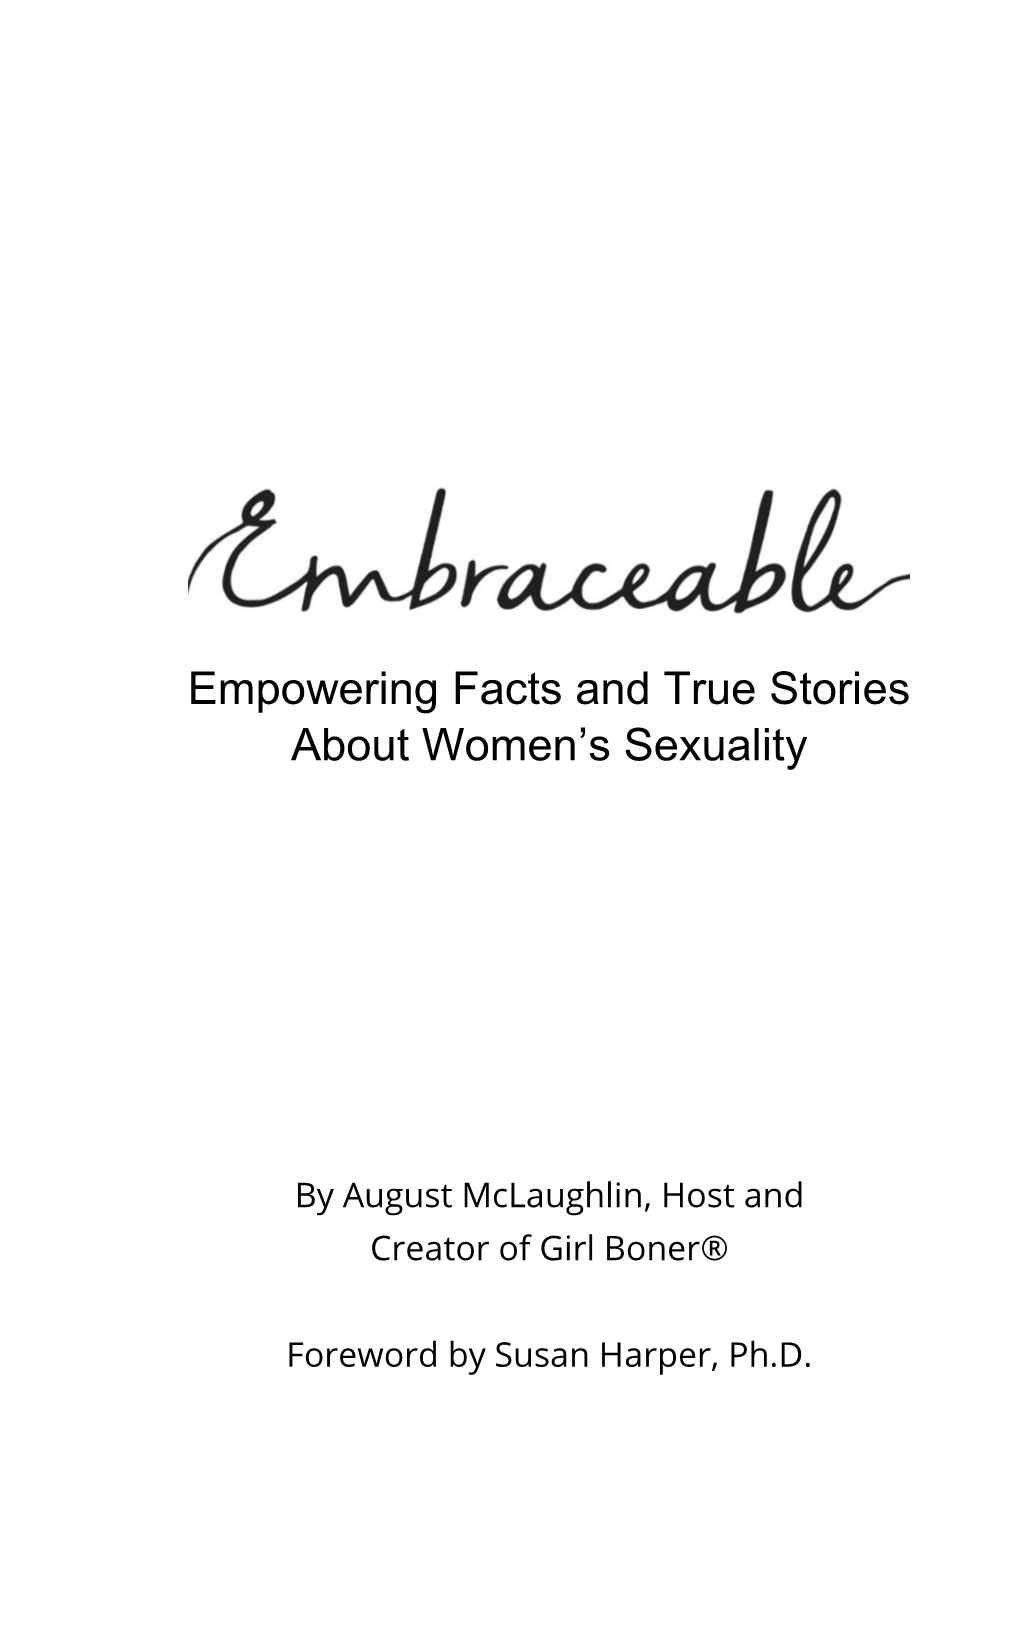 Empowering Facts and True Stories About Women's Sexuality